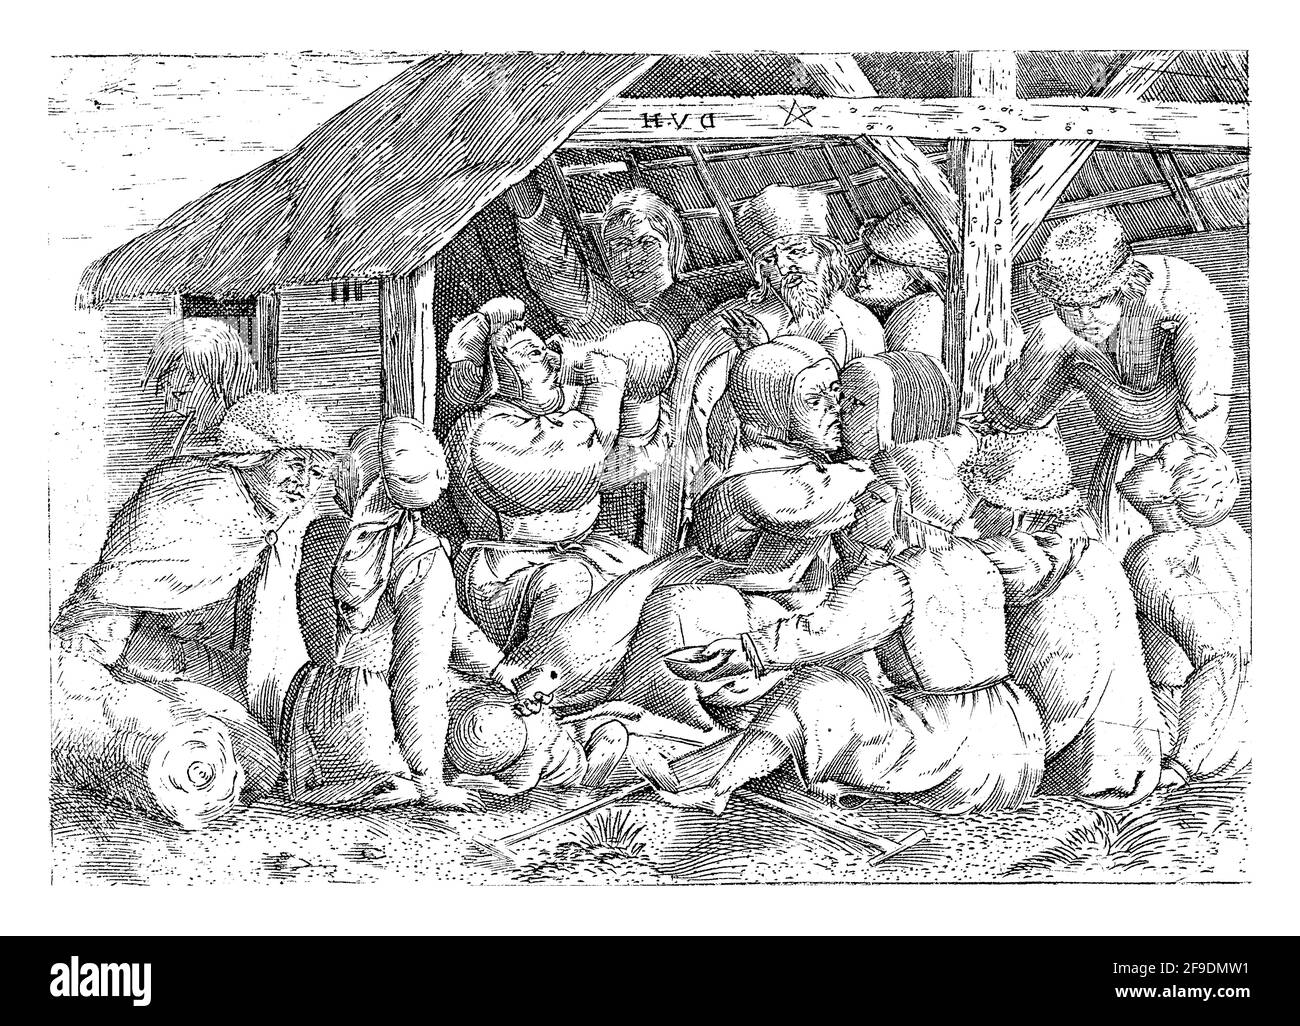 At a hut, beggars and cripples sit on the floor, watching figures eating and drinking. A fat man puts a pitcher to his mouth. In the middle a kissing Stock Photo